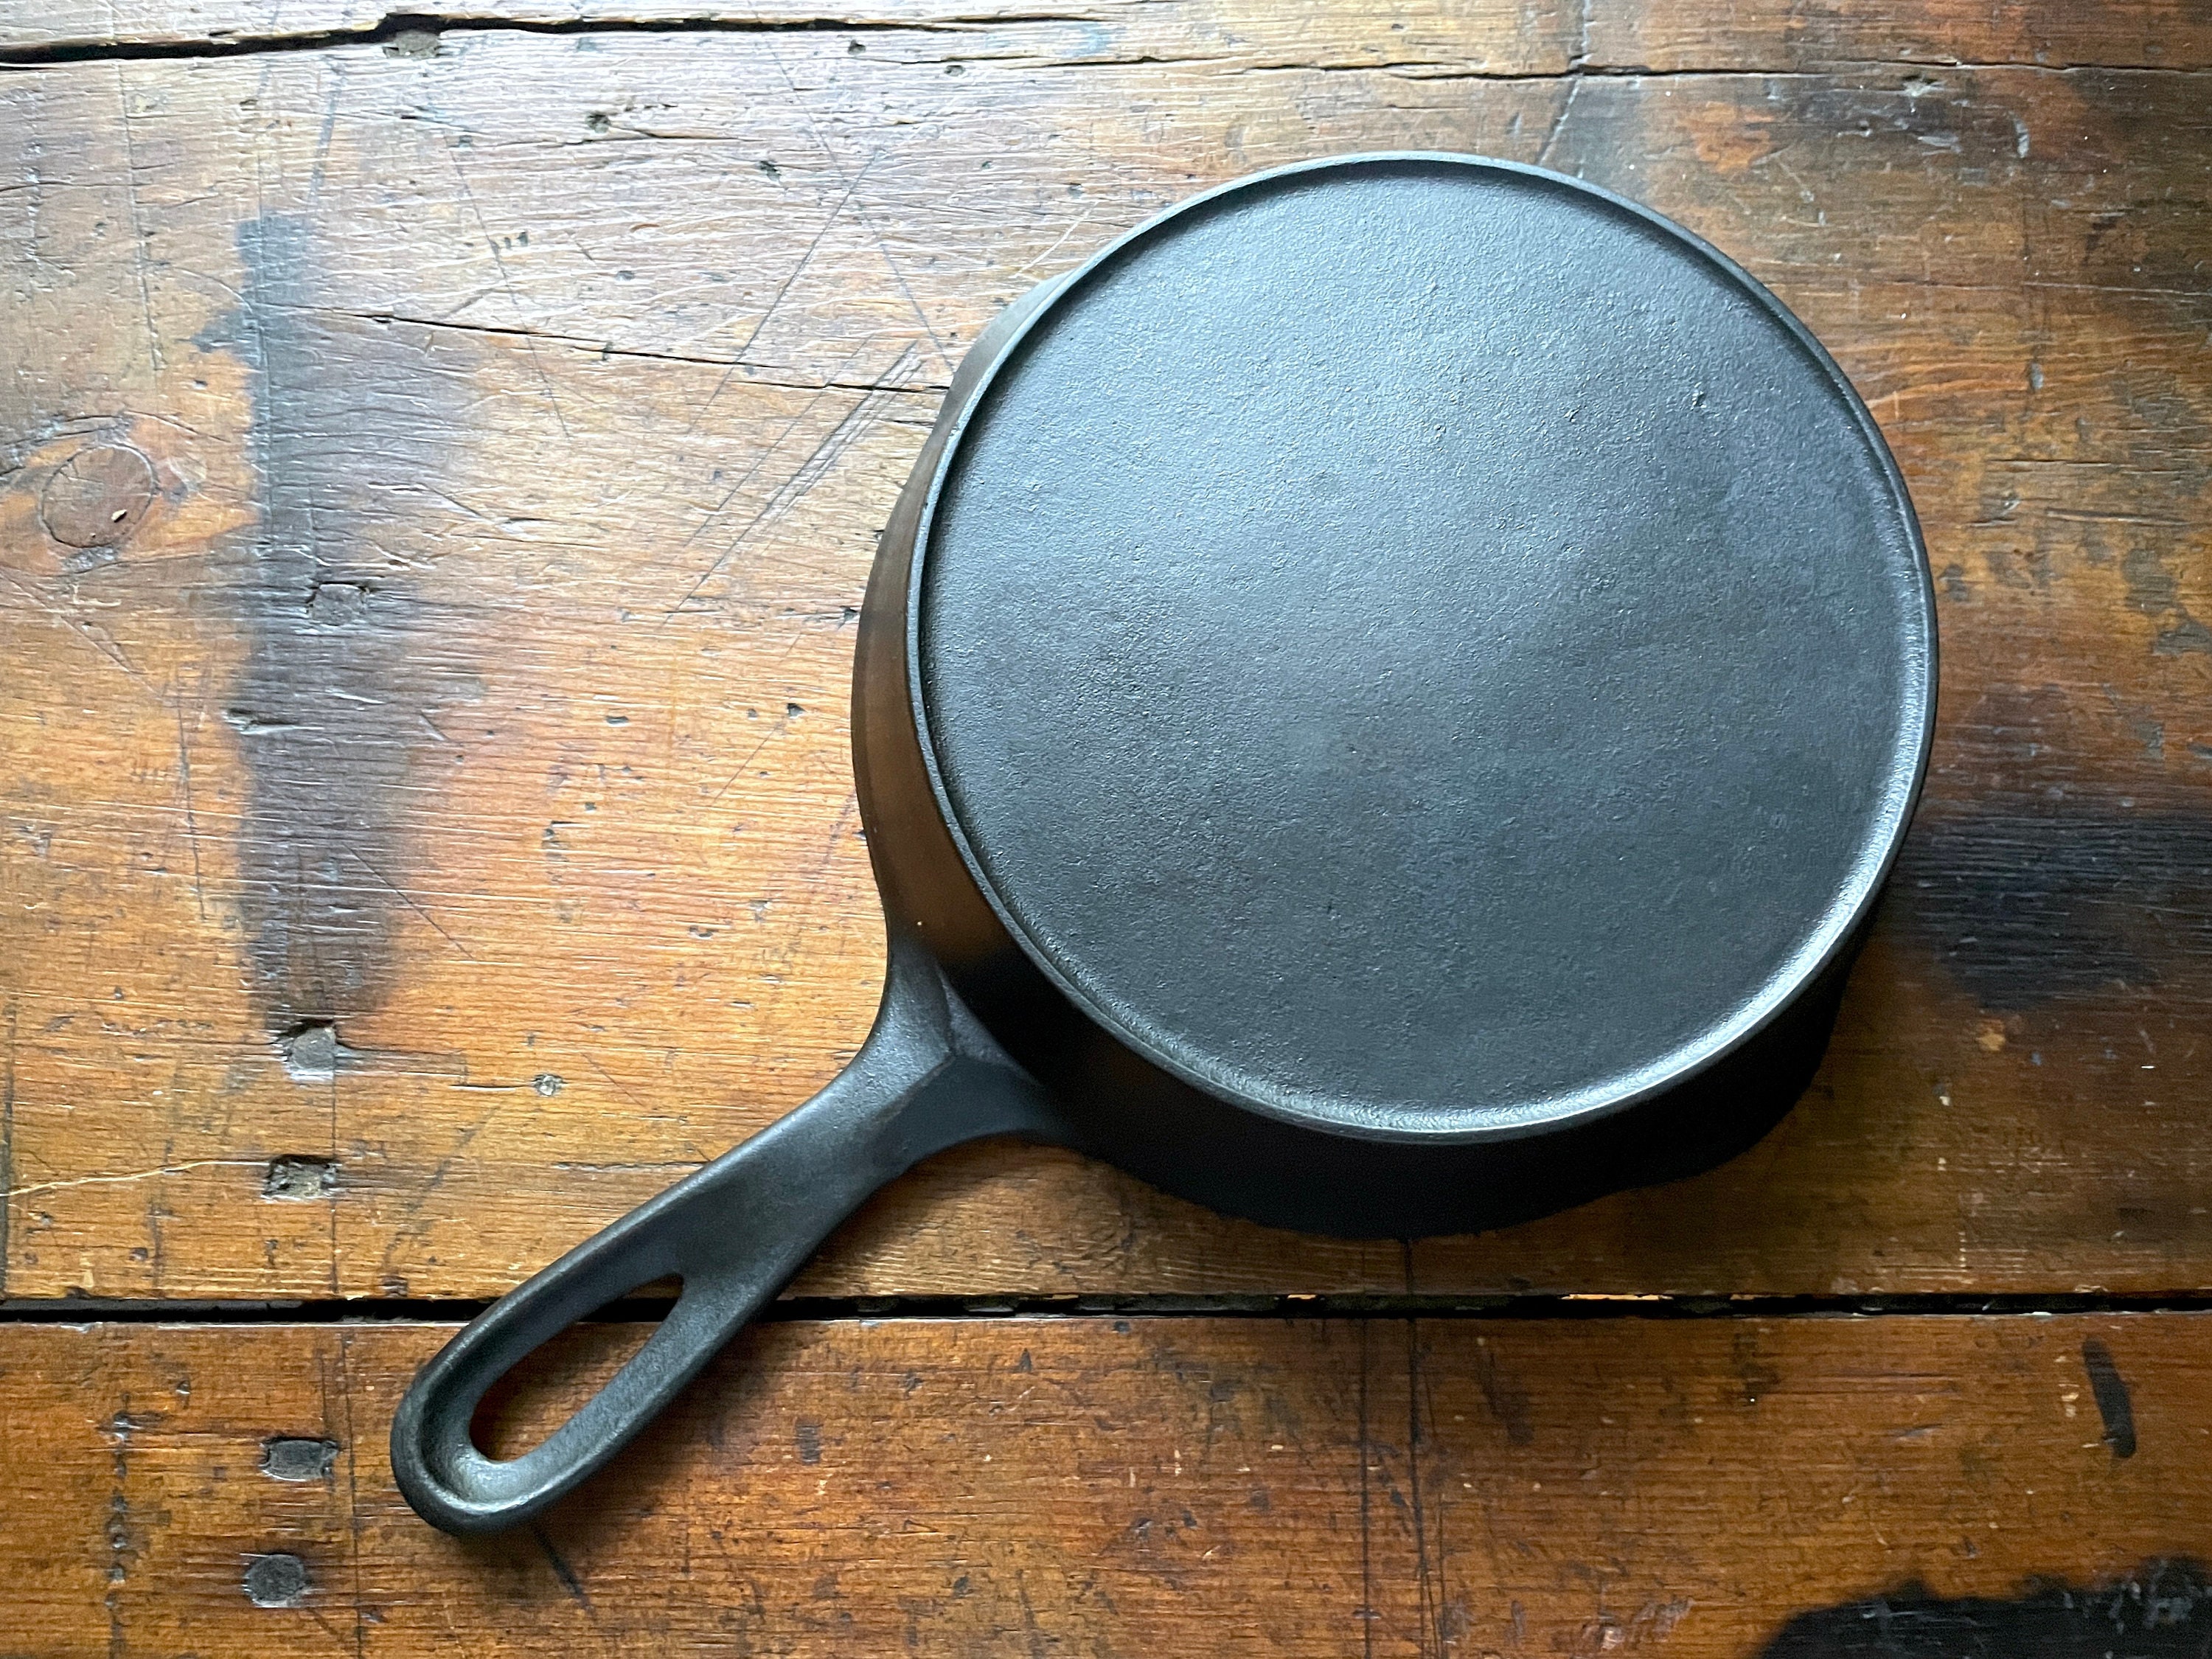 Vintage Cast Iron Skillet Frying Pan Unmarked 6 1/4 Inch made in Taiwan